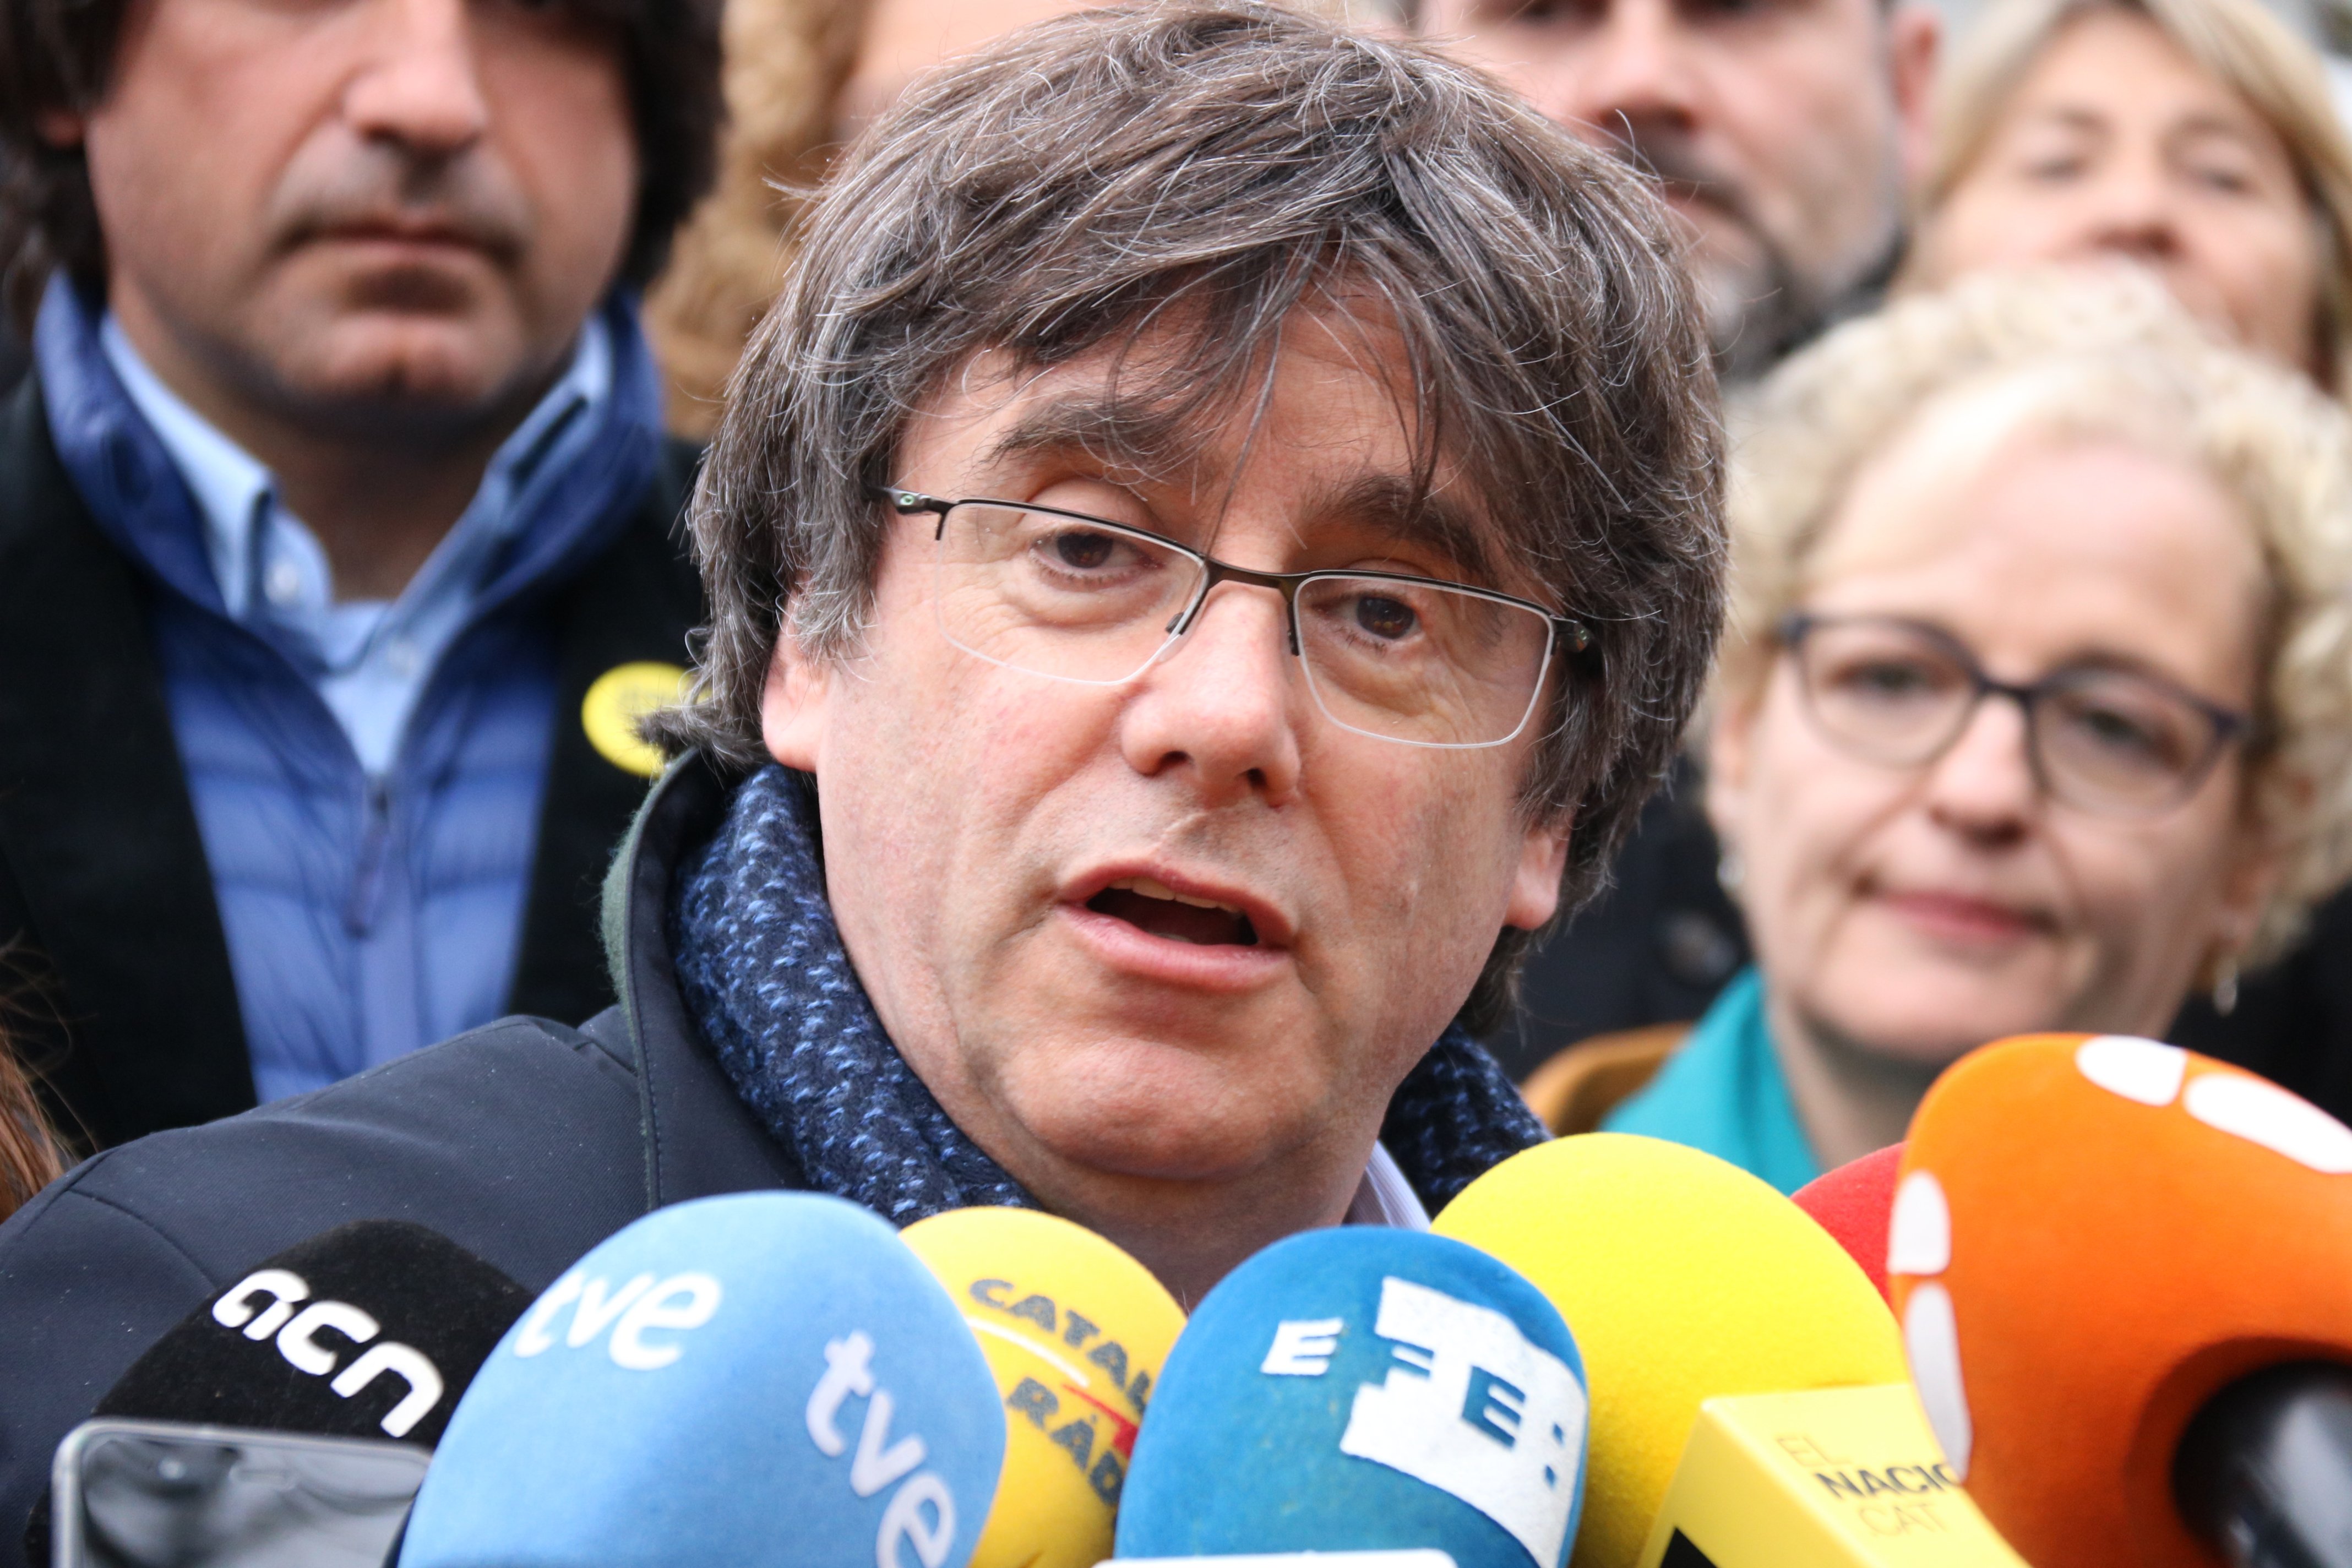 Puigdemont applies again to travel to Quebec after first attempt blocked